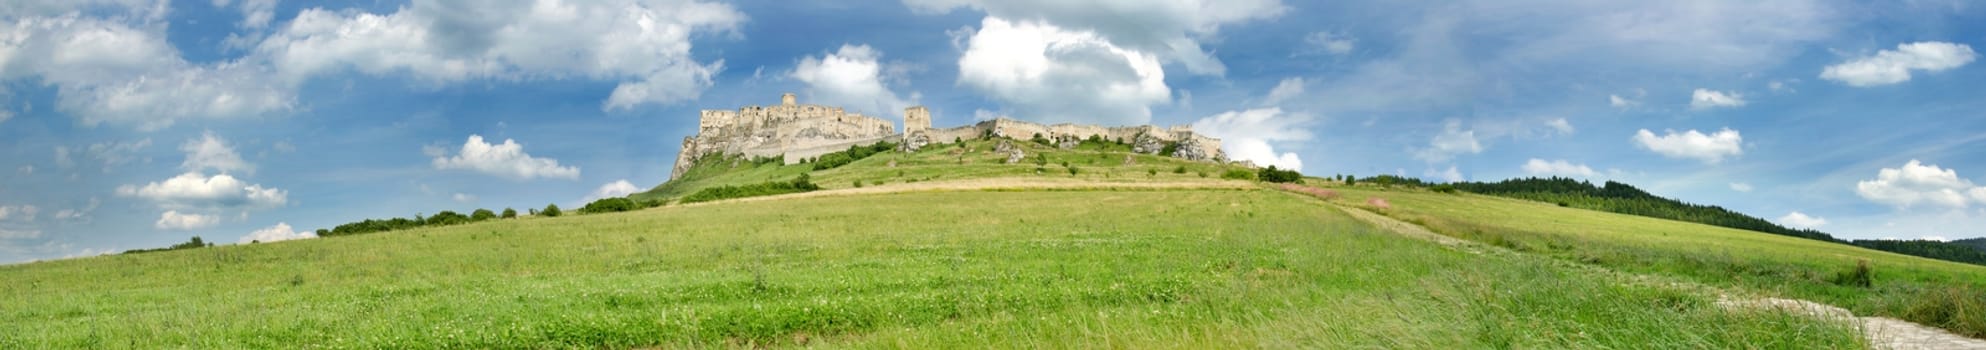 Slovakia Spiss castle on the hill in summer. 